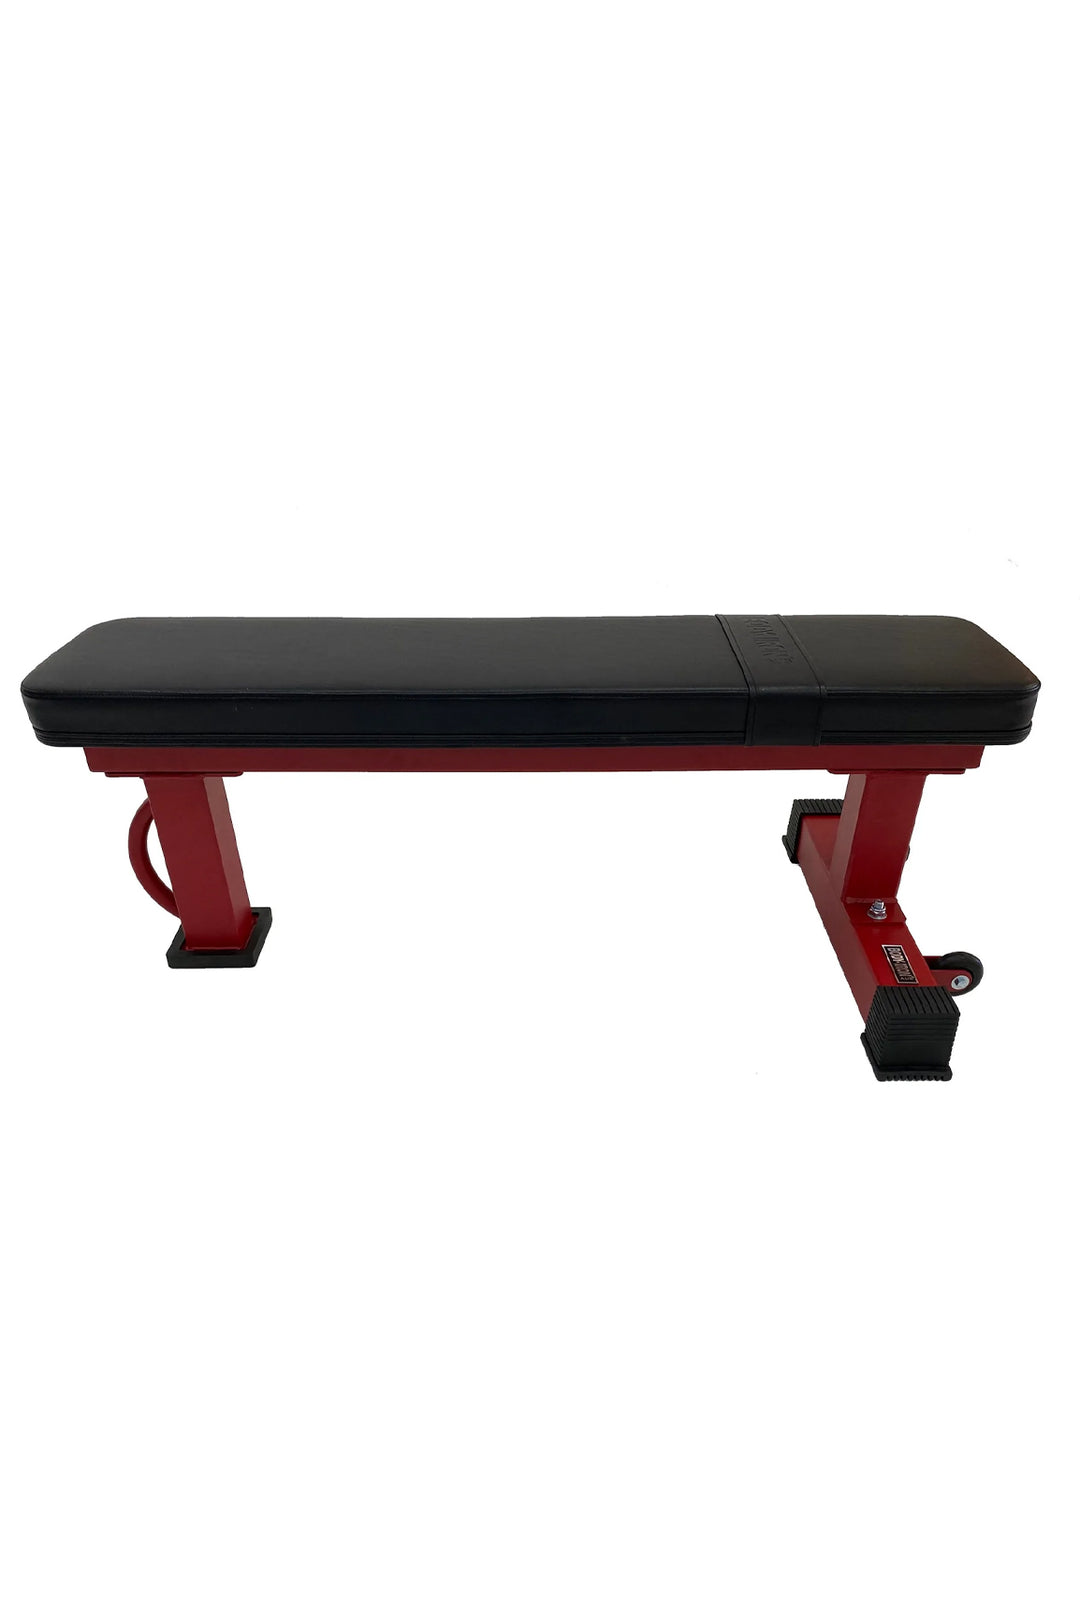 Red and black flat weight bench